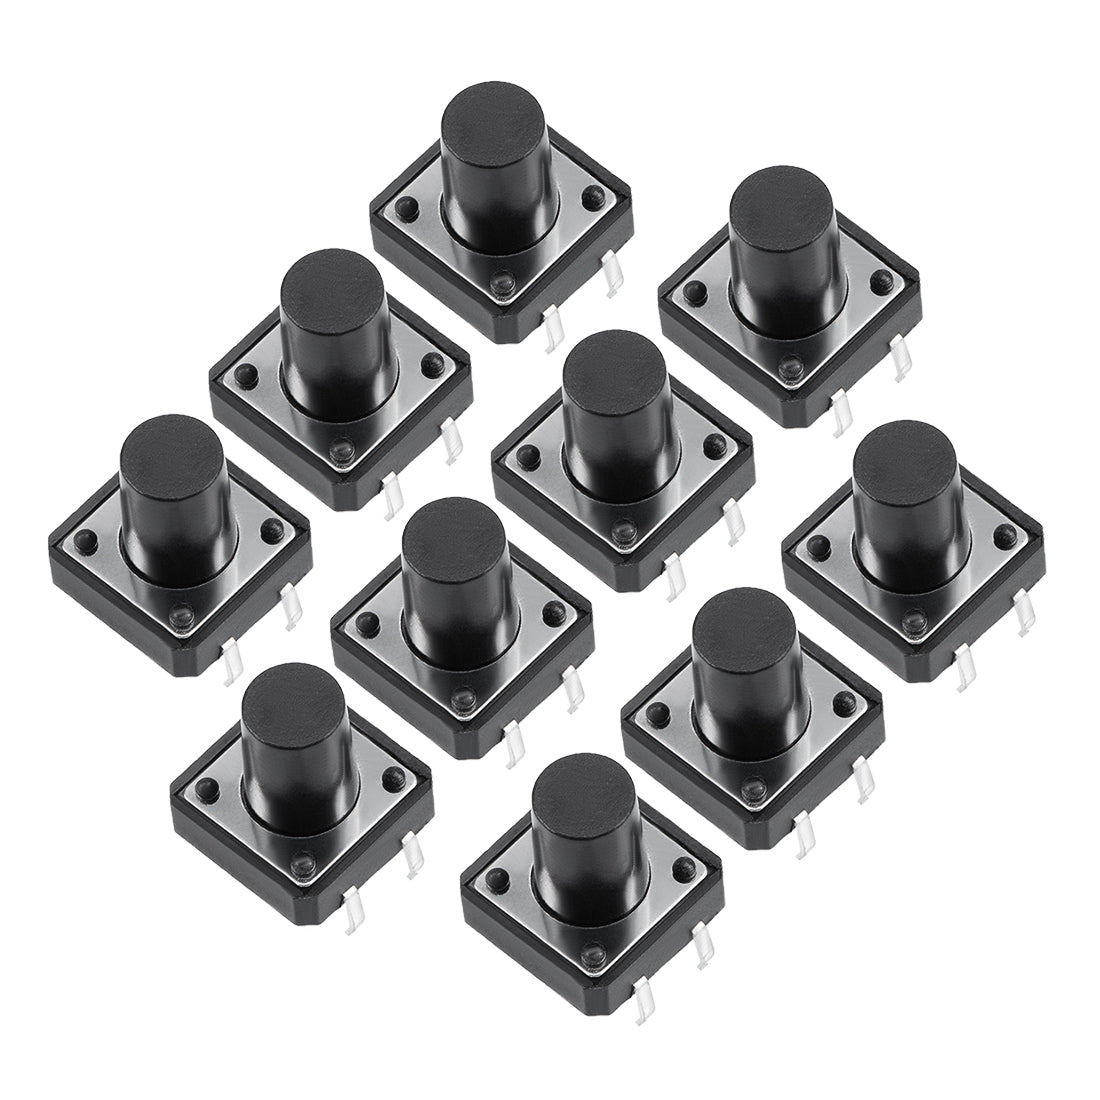 uxcell Uxcell 12x12x12mm 4 Pin Panel Mini/Micro/Small PCB Momentary Tactile Tact Push Button Switch DIP 10PCS